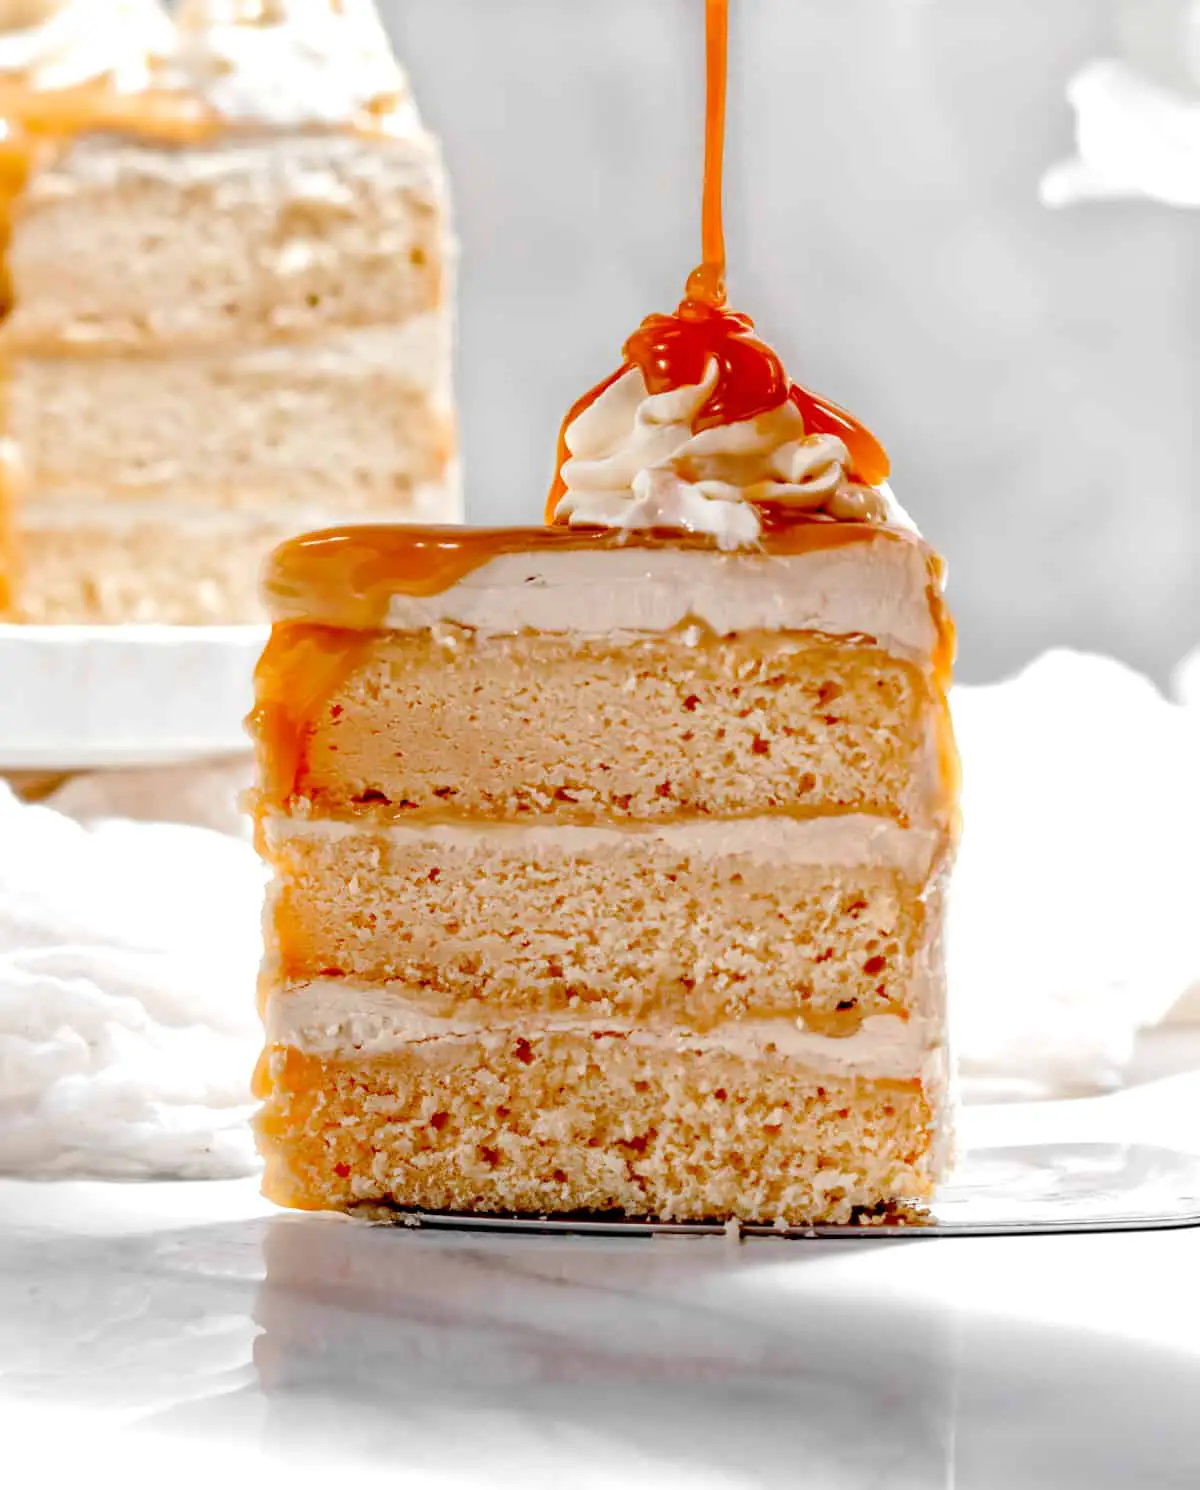 slice of cake on cake server with butterscotch drizzled on top